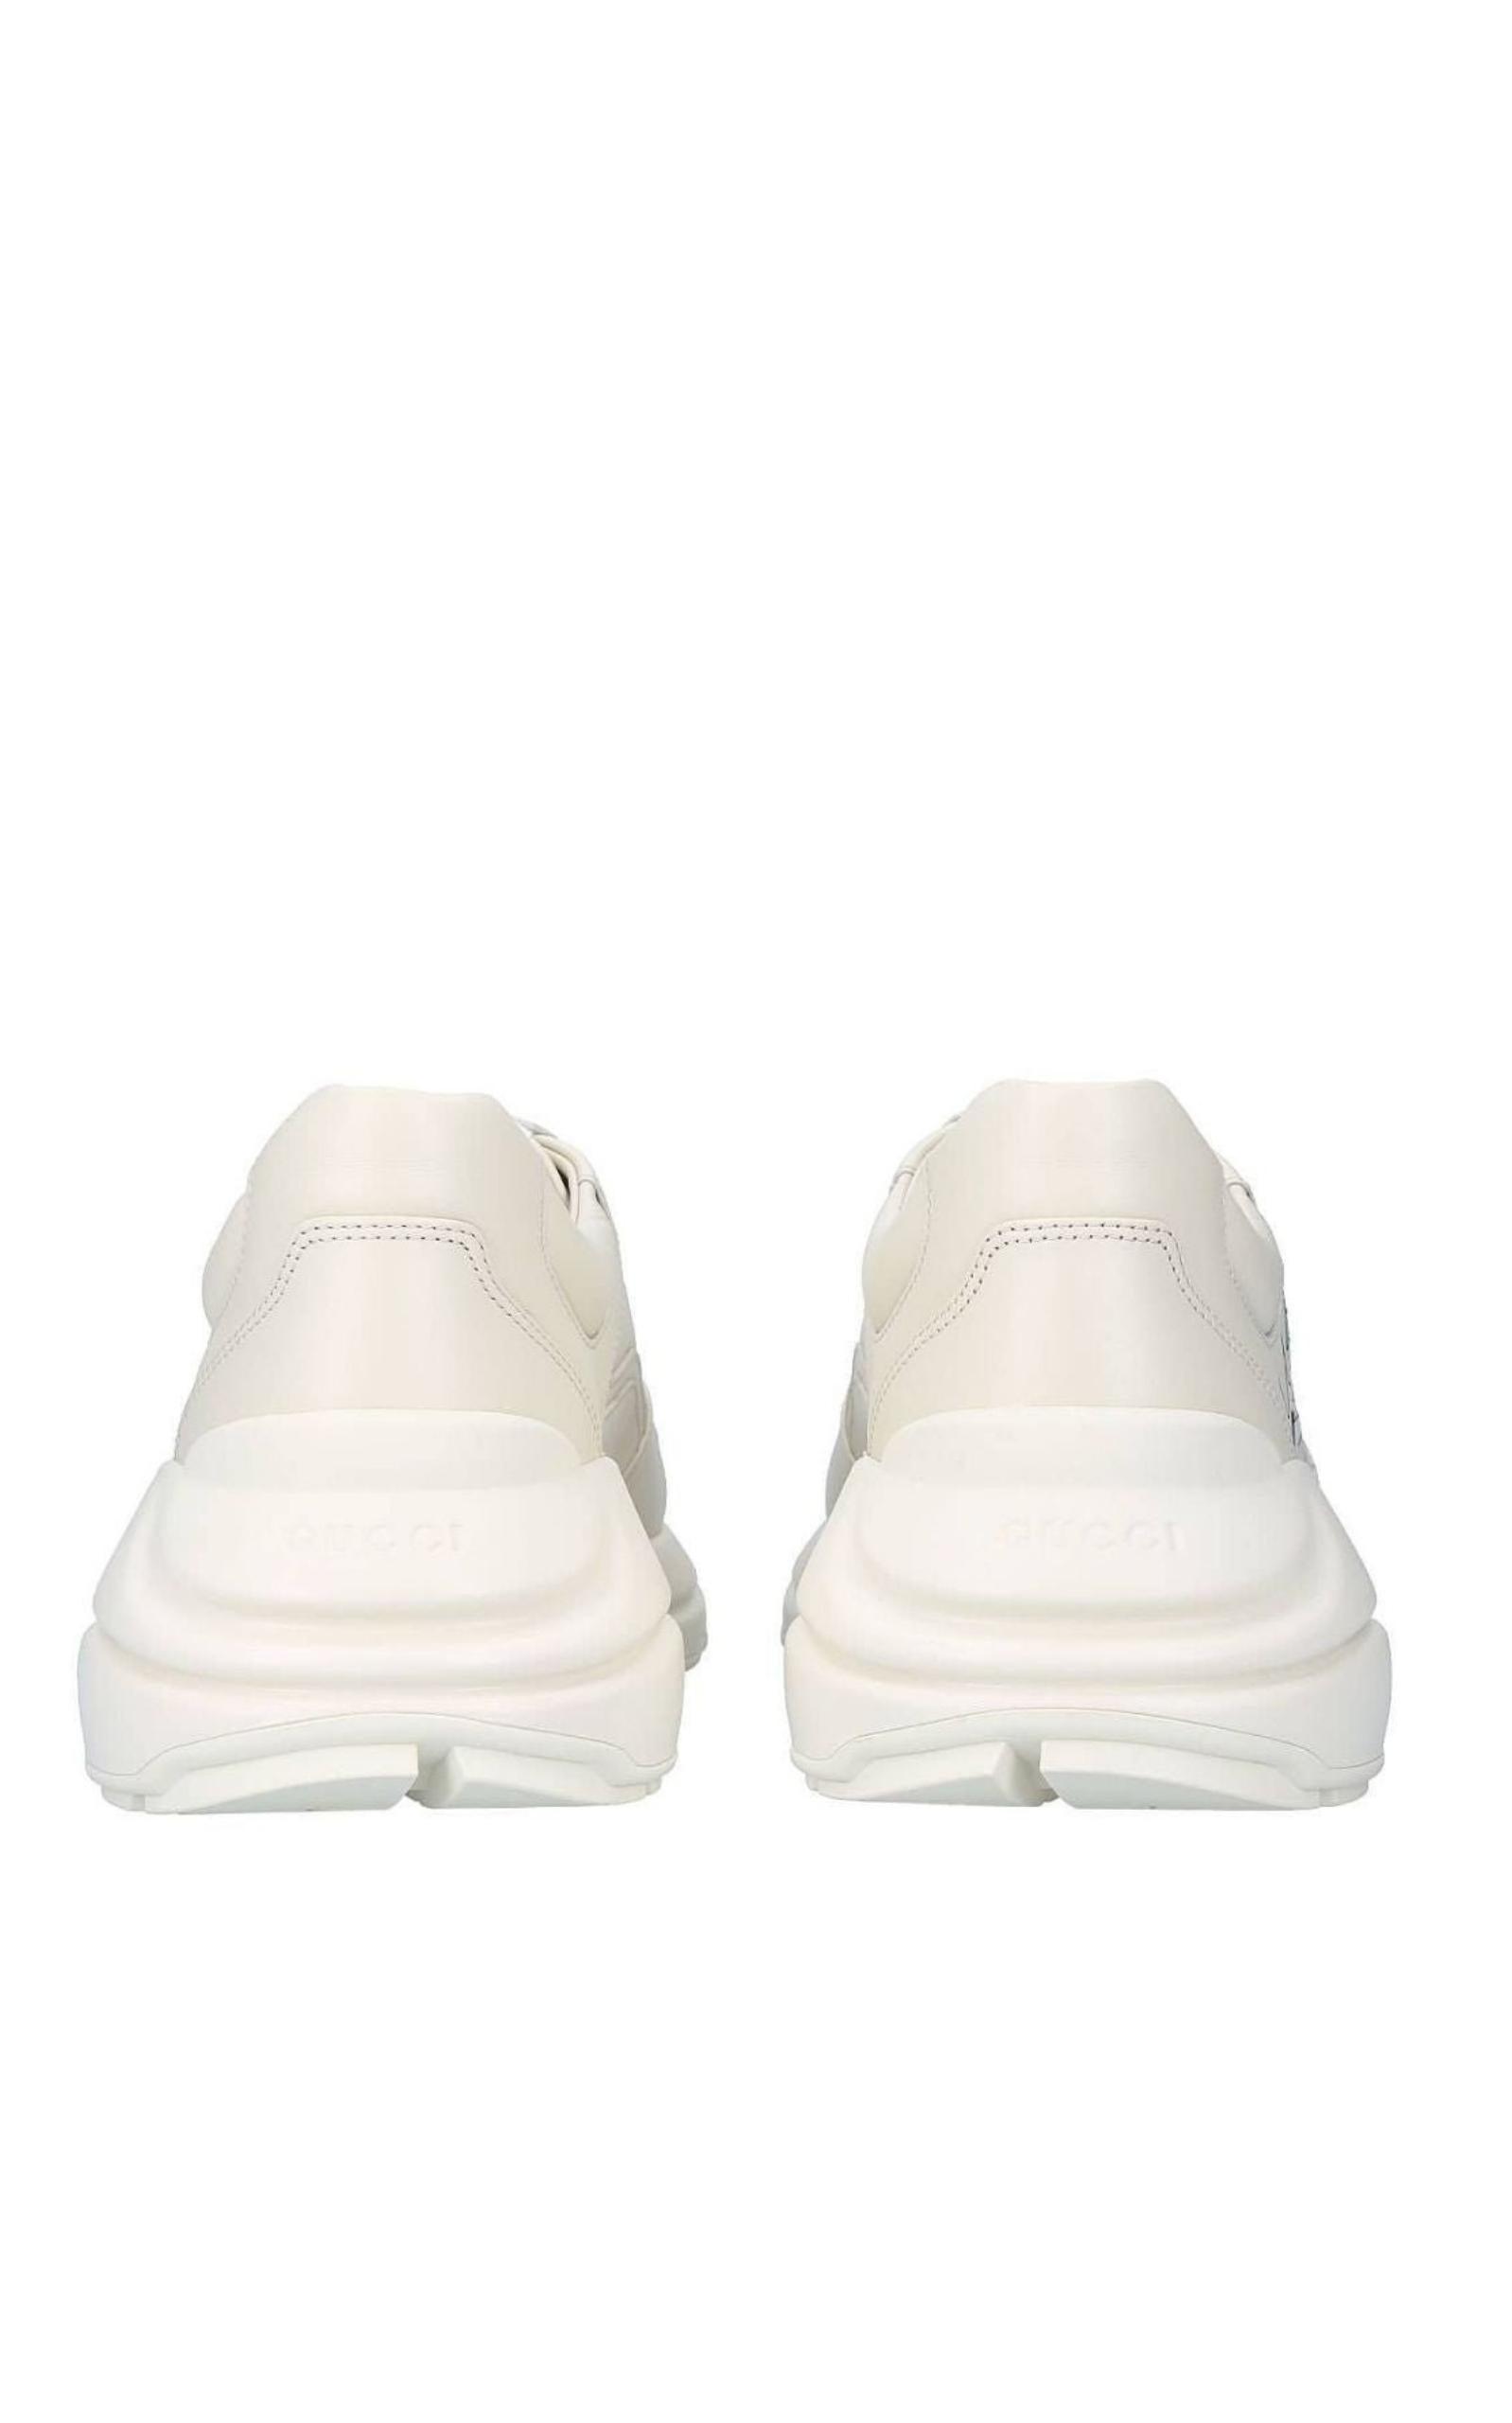 Gucci Off-White Rhyton Sneakers